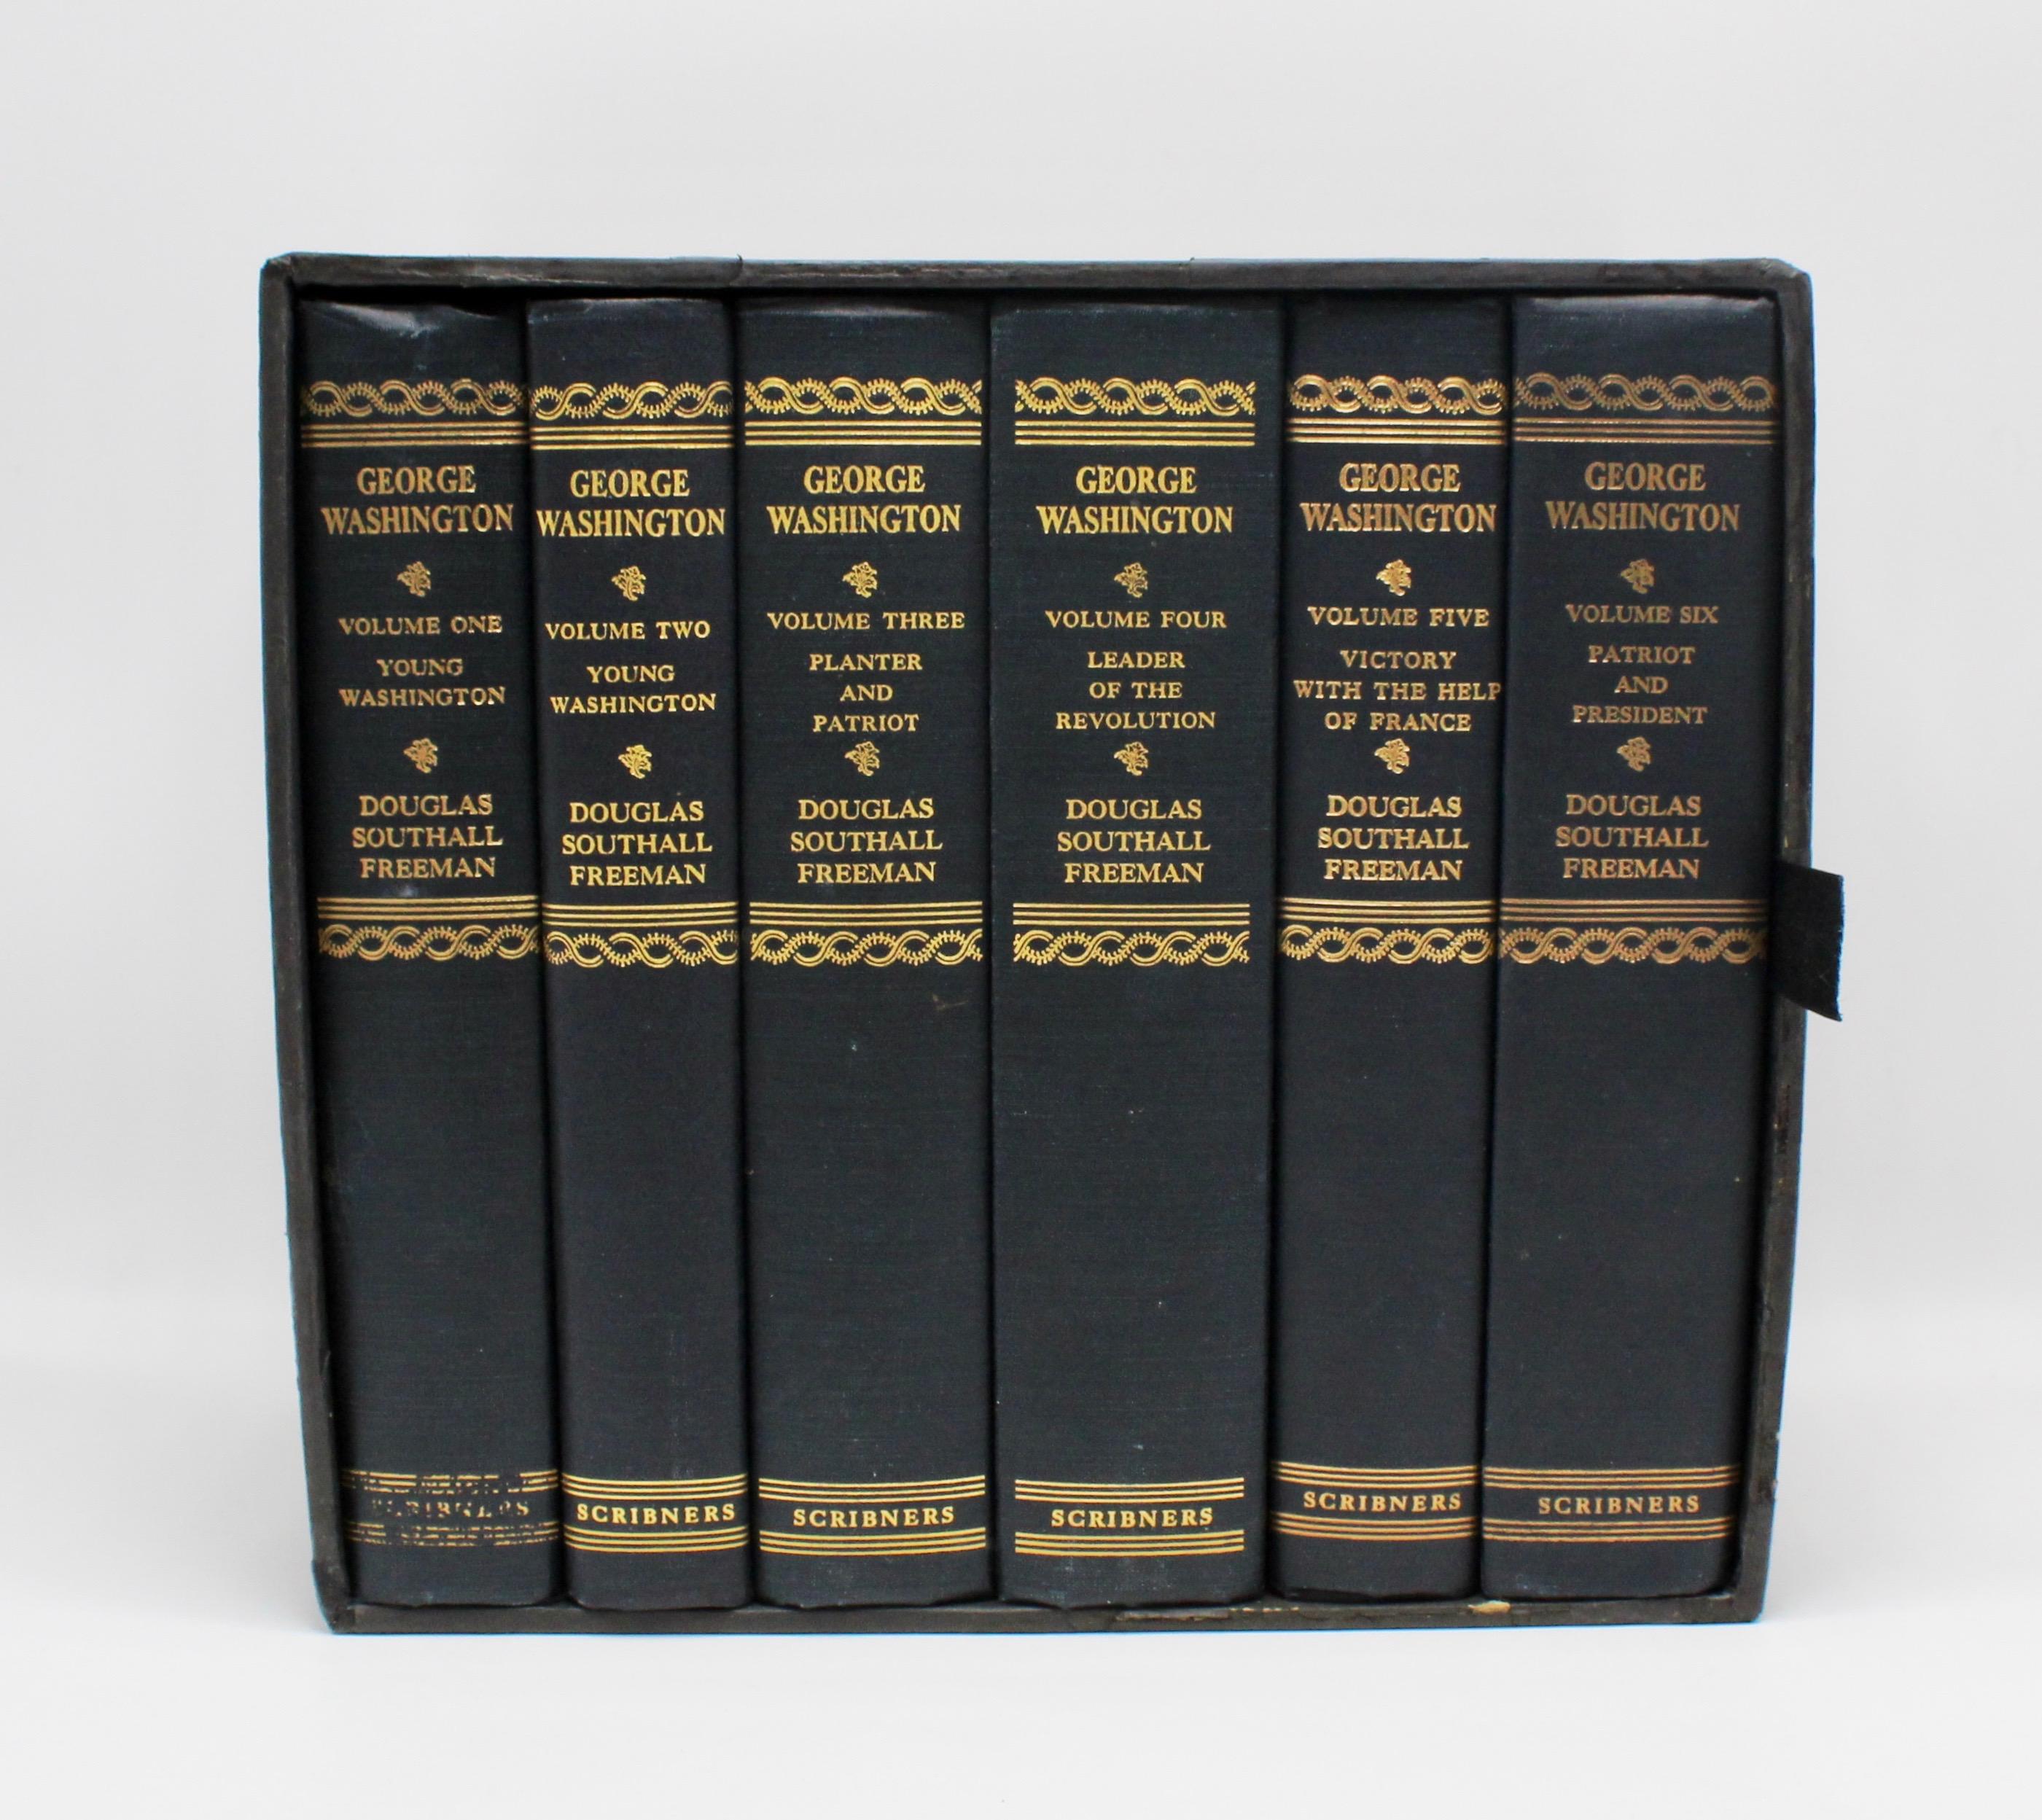 George Washington: A Biography by Douglas Southall Freeman, 6-Volume Set. New York: Charles Scribner's Sons, 1949-1954. Publisher's bindings with slipcase, octavo.

This set of Douglas Freeman's biography of Washington were published out of New York